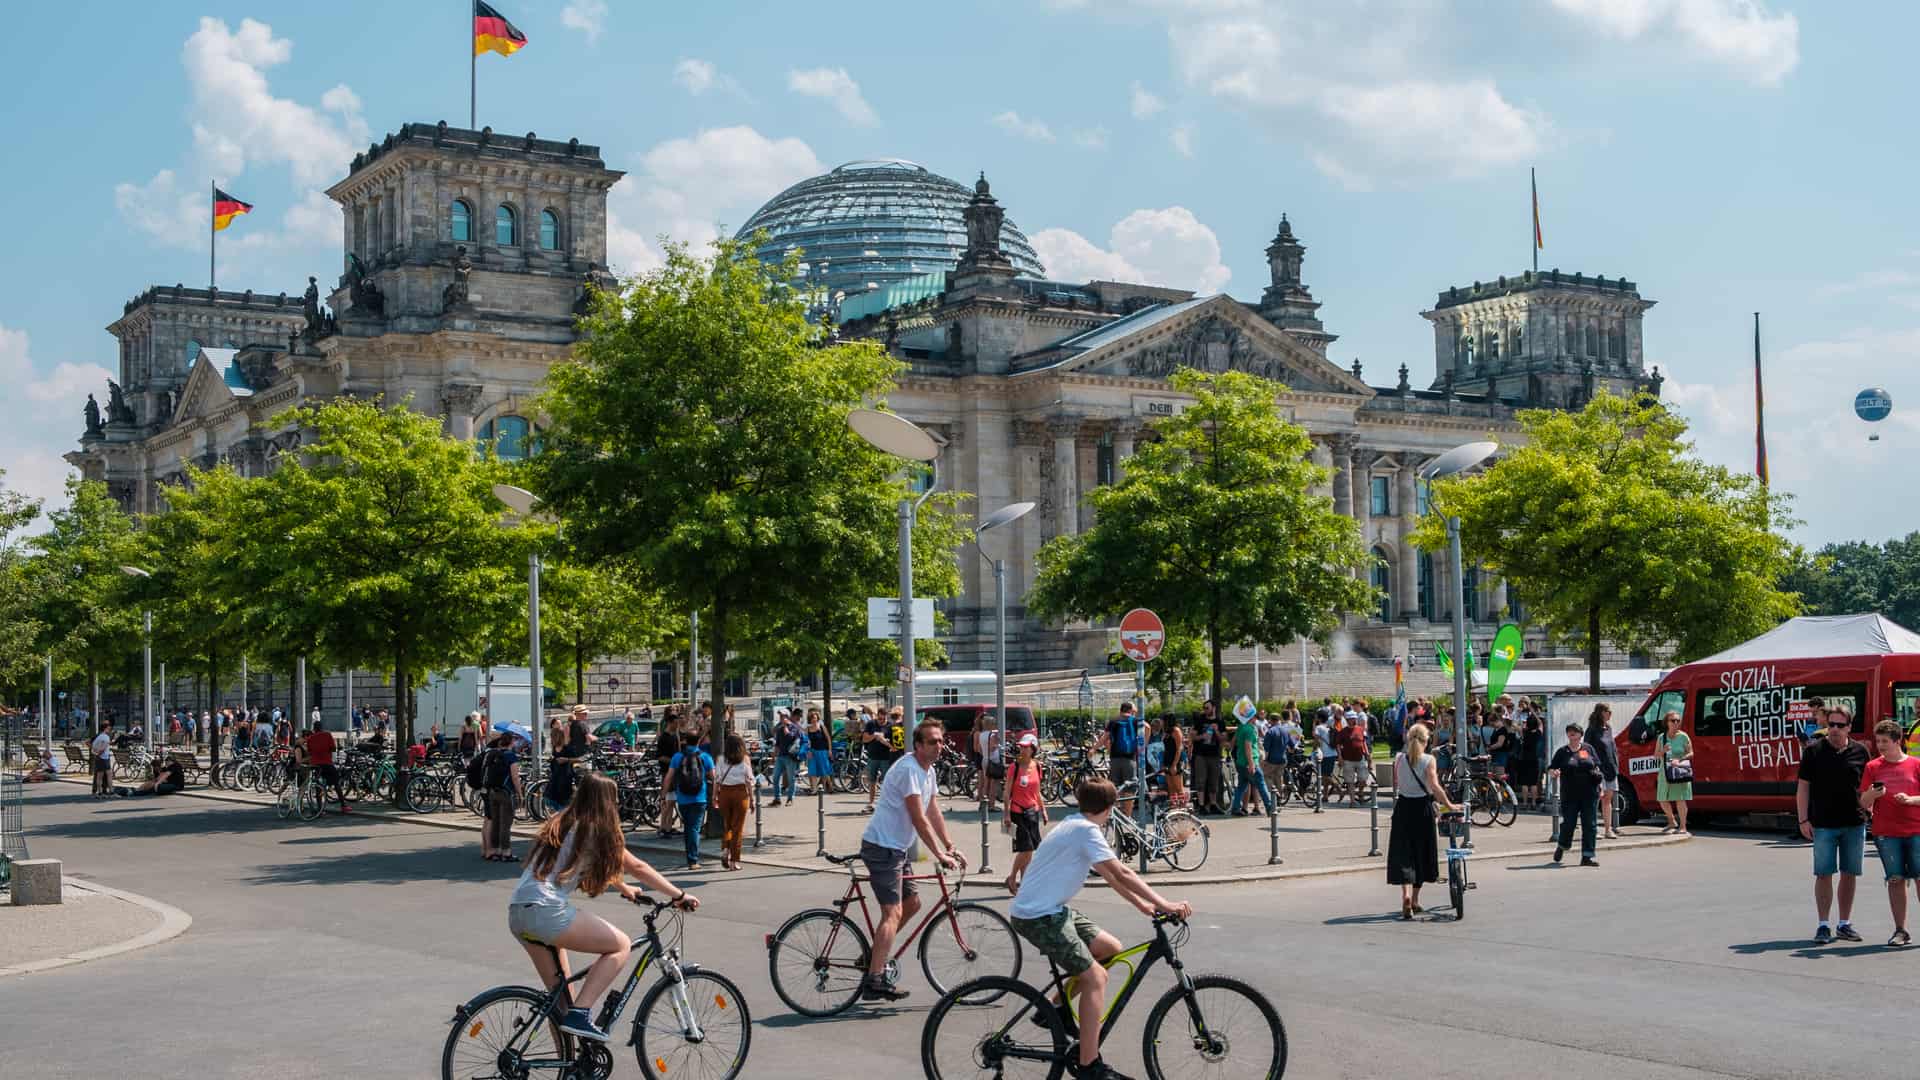 People with bicycles in front of Reichstag, the German parliament, in Berlin, Germany